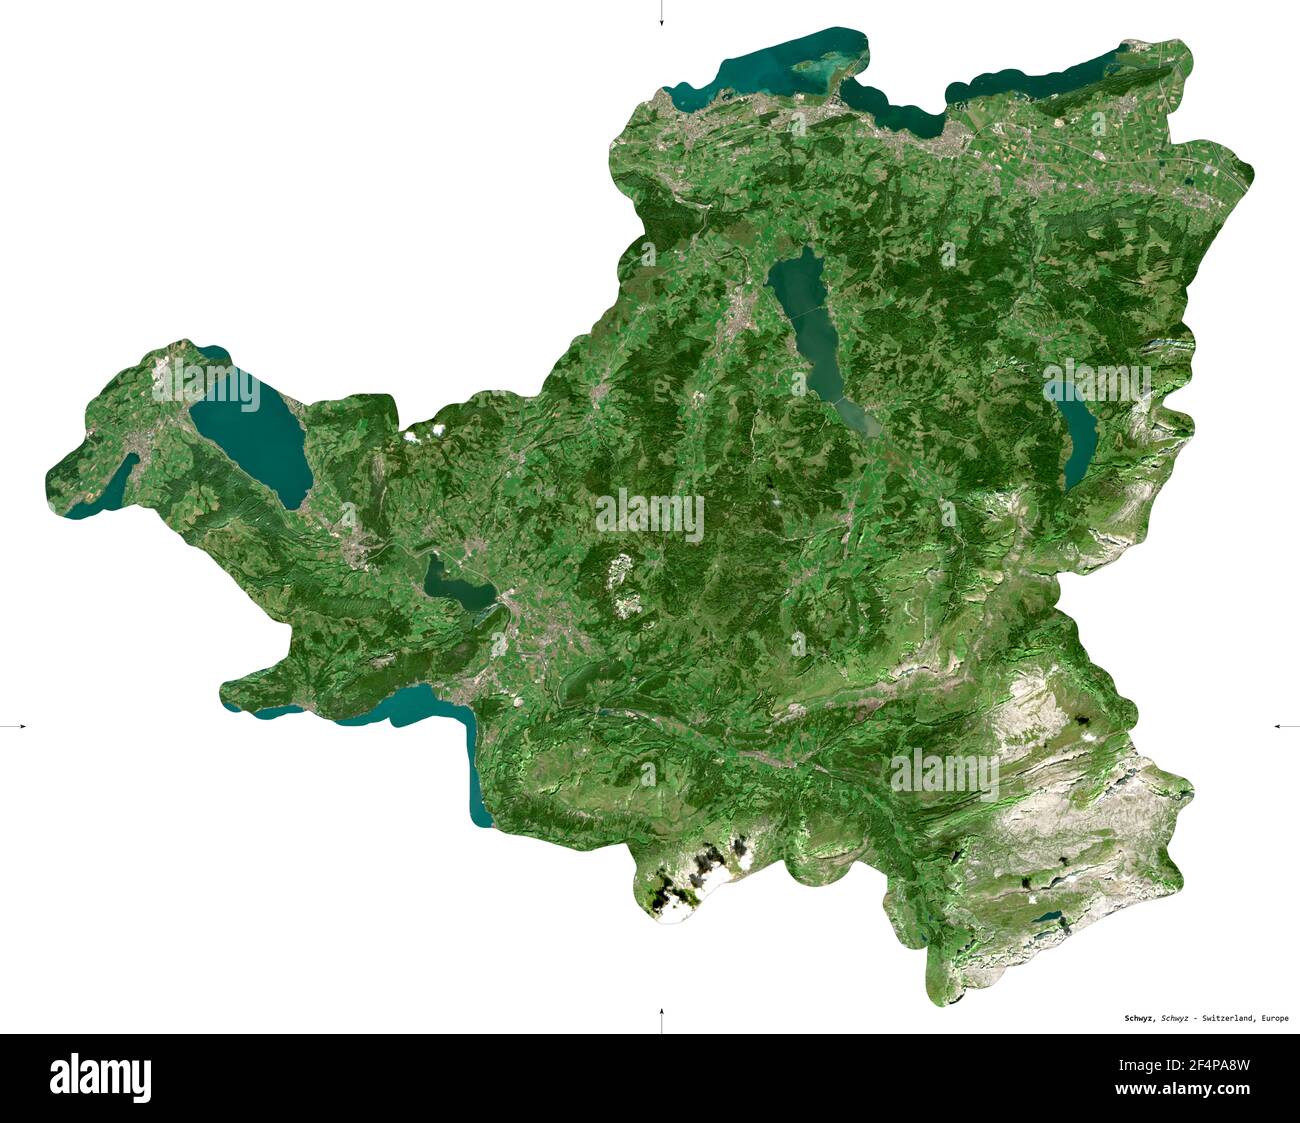 Country shape of Switzerland - 3D render of country borders fill - Annex 59